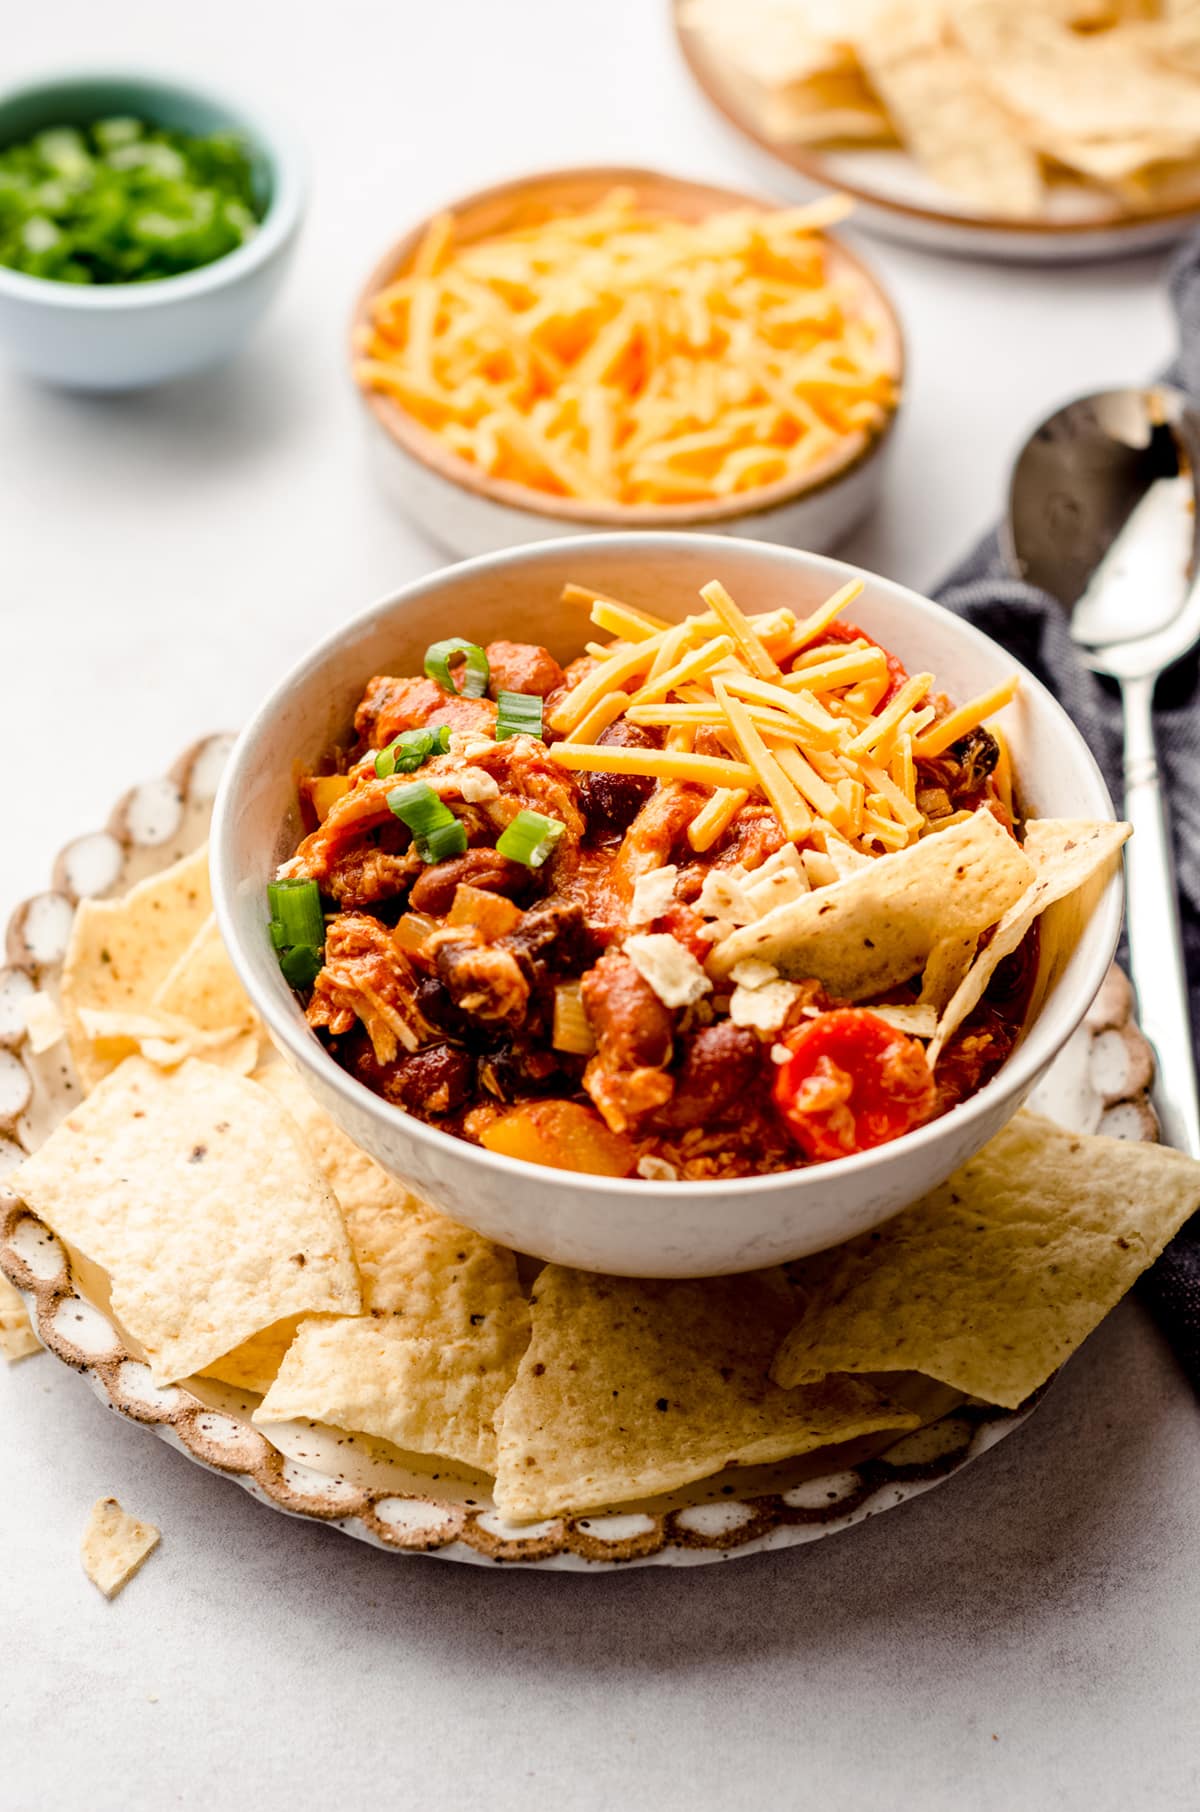 buffalo chicken chili in a bowl on a plate with tortilla chips